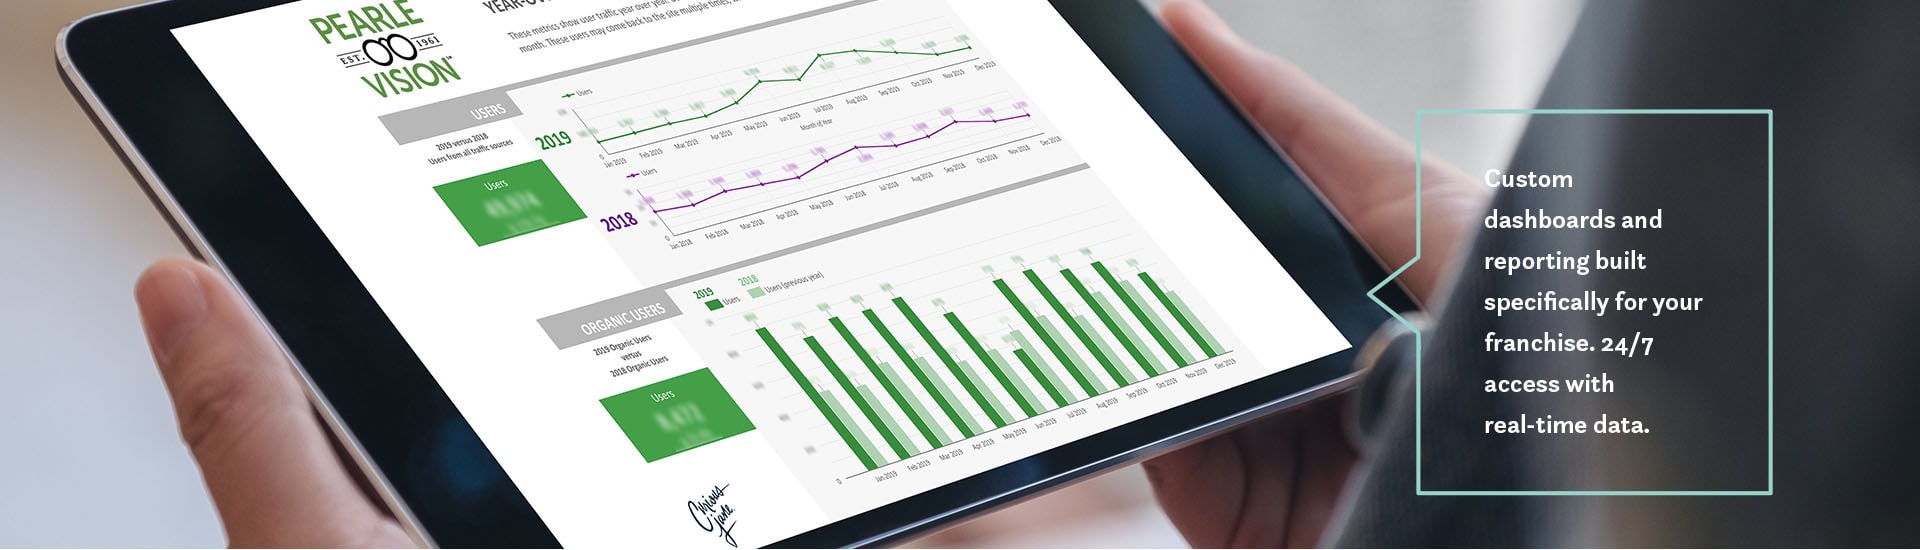 Custom dashboards and reporting built specifically for your franchise